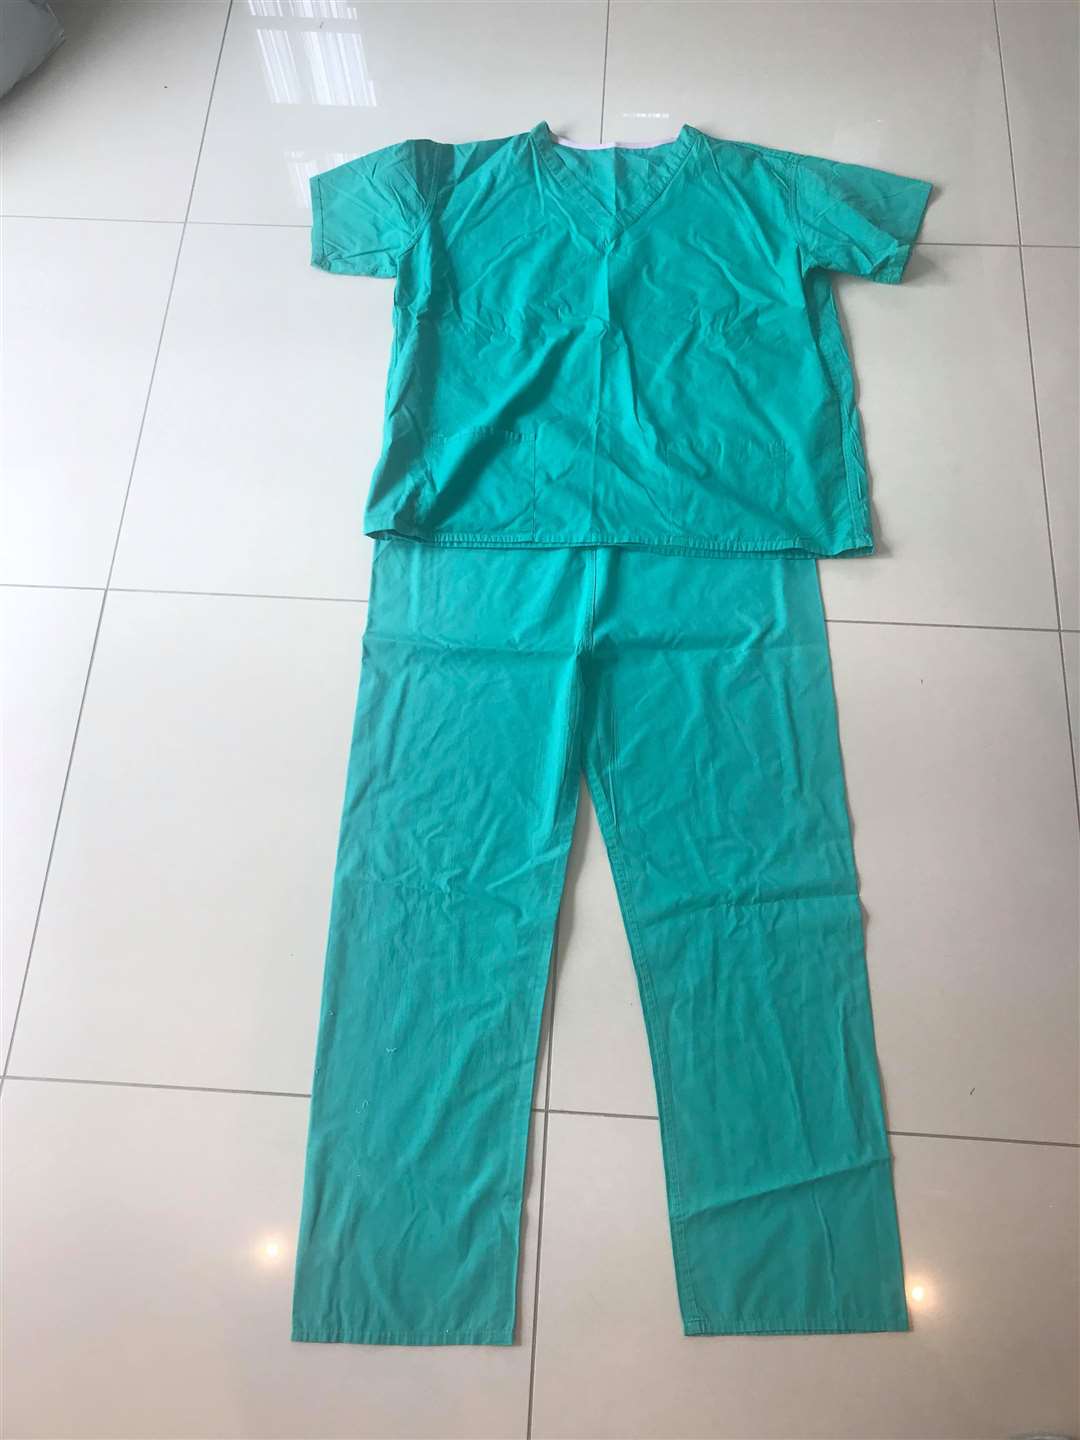 Scrubs like this will be donated to hospitals in Kent